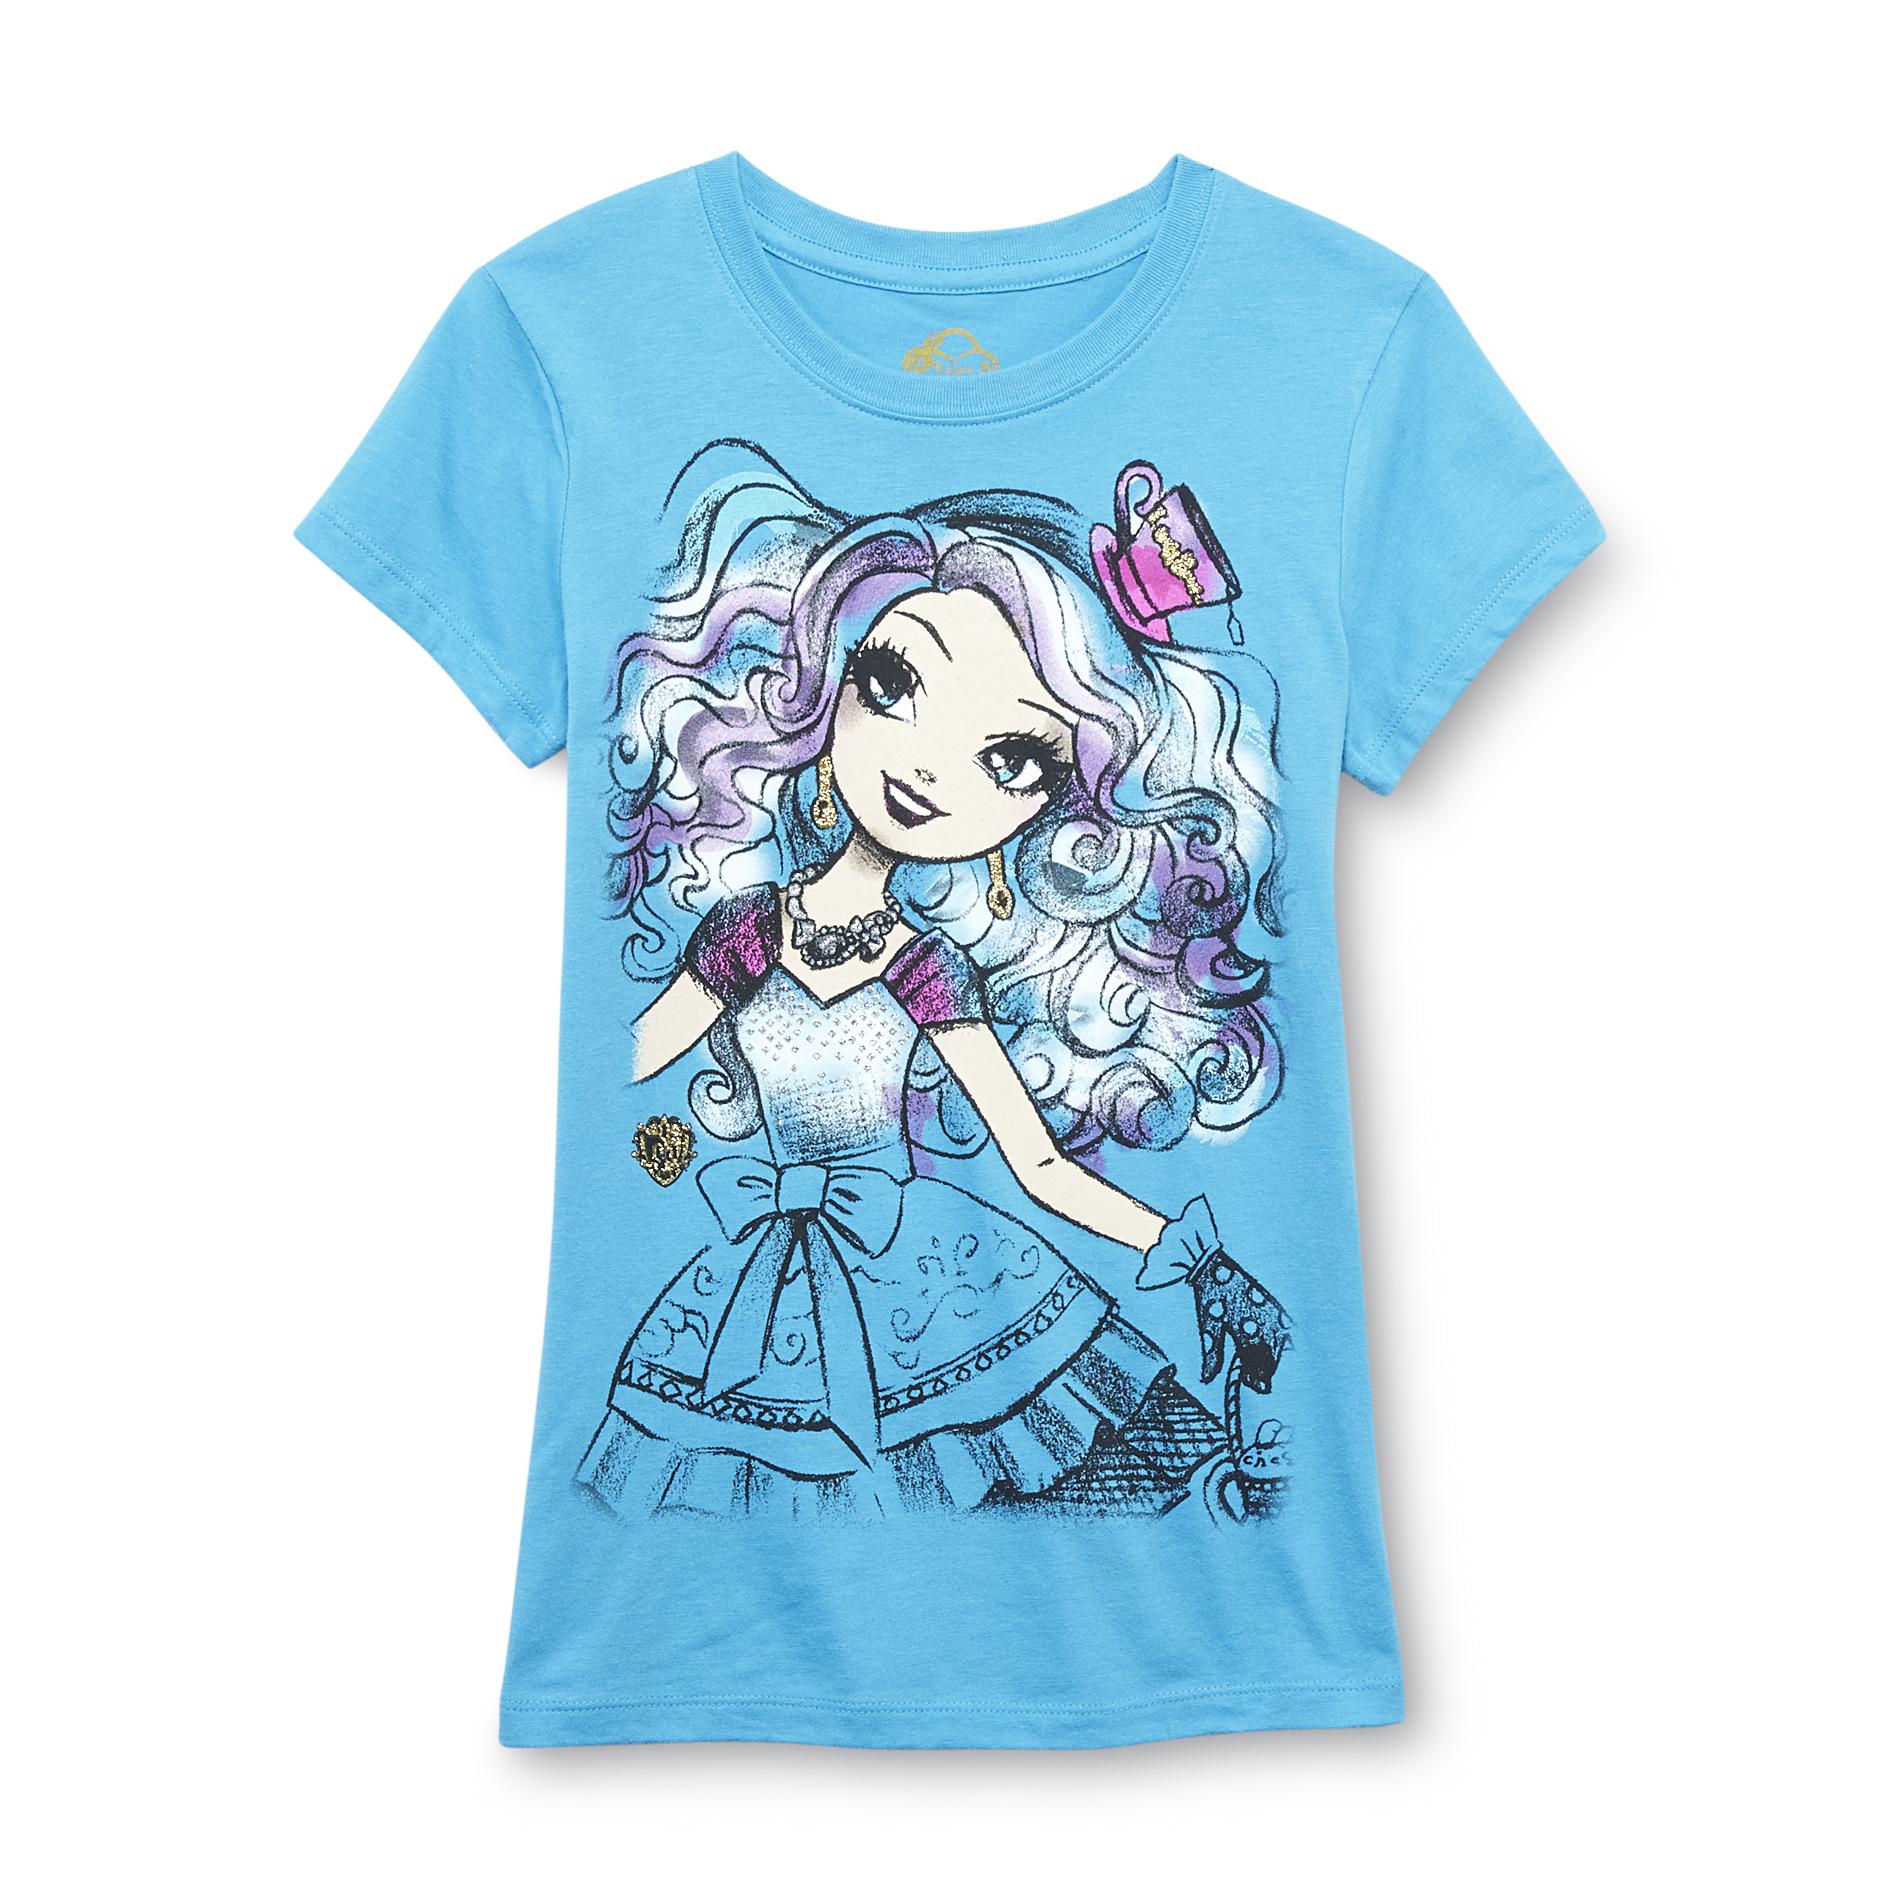 Ever After High Girl's Graphic T-Shirt - Madeline Hatter